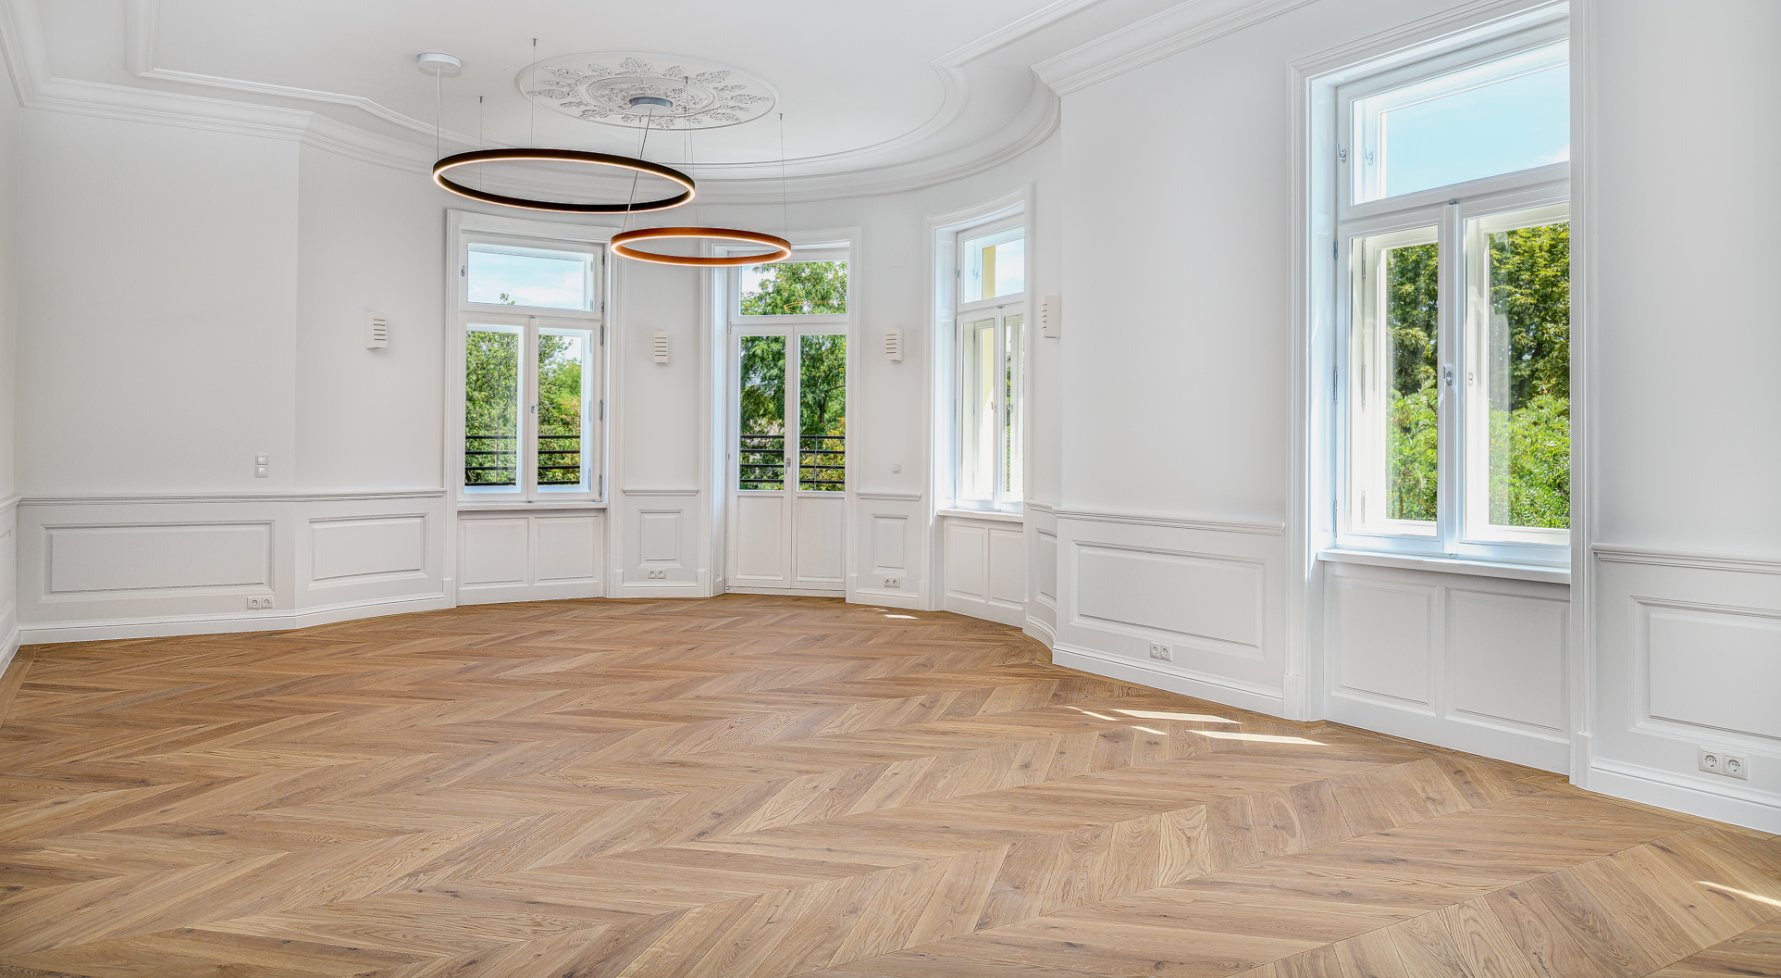 Property in 1090 Wien, 9. Bezirk: Grand Park Residence: Stately old building with green views! - picture 1